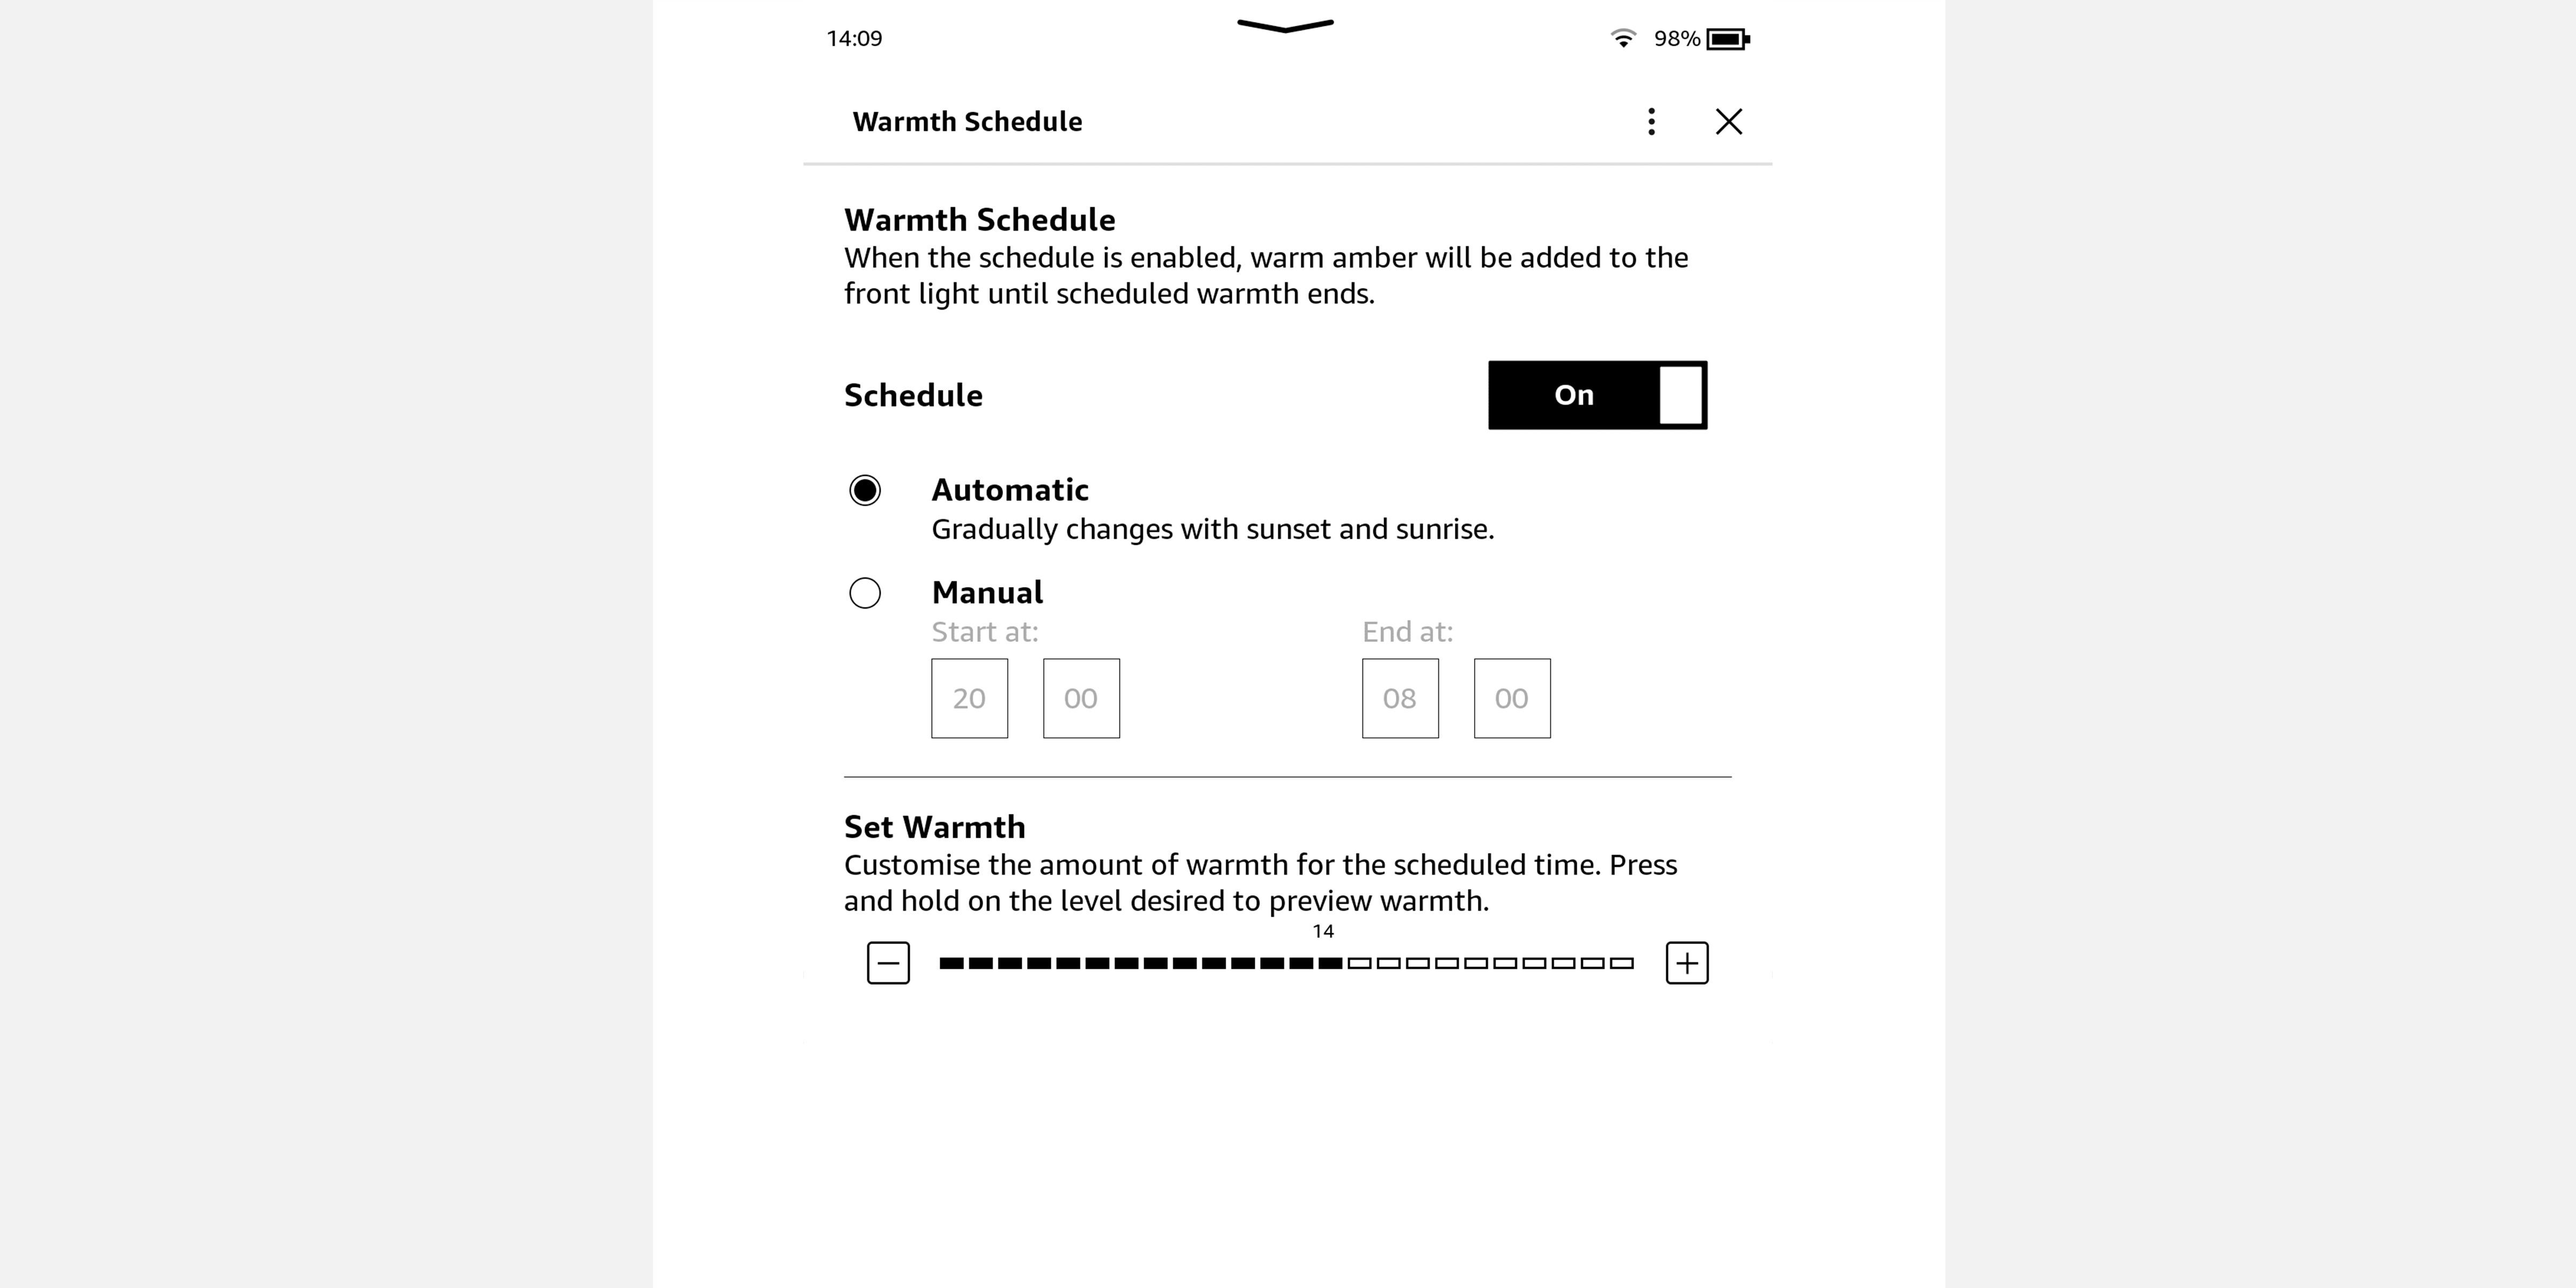 Screenshot of Kindle Oasis showing the Warmth Schedule settings screen